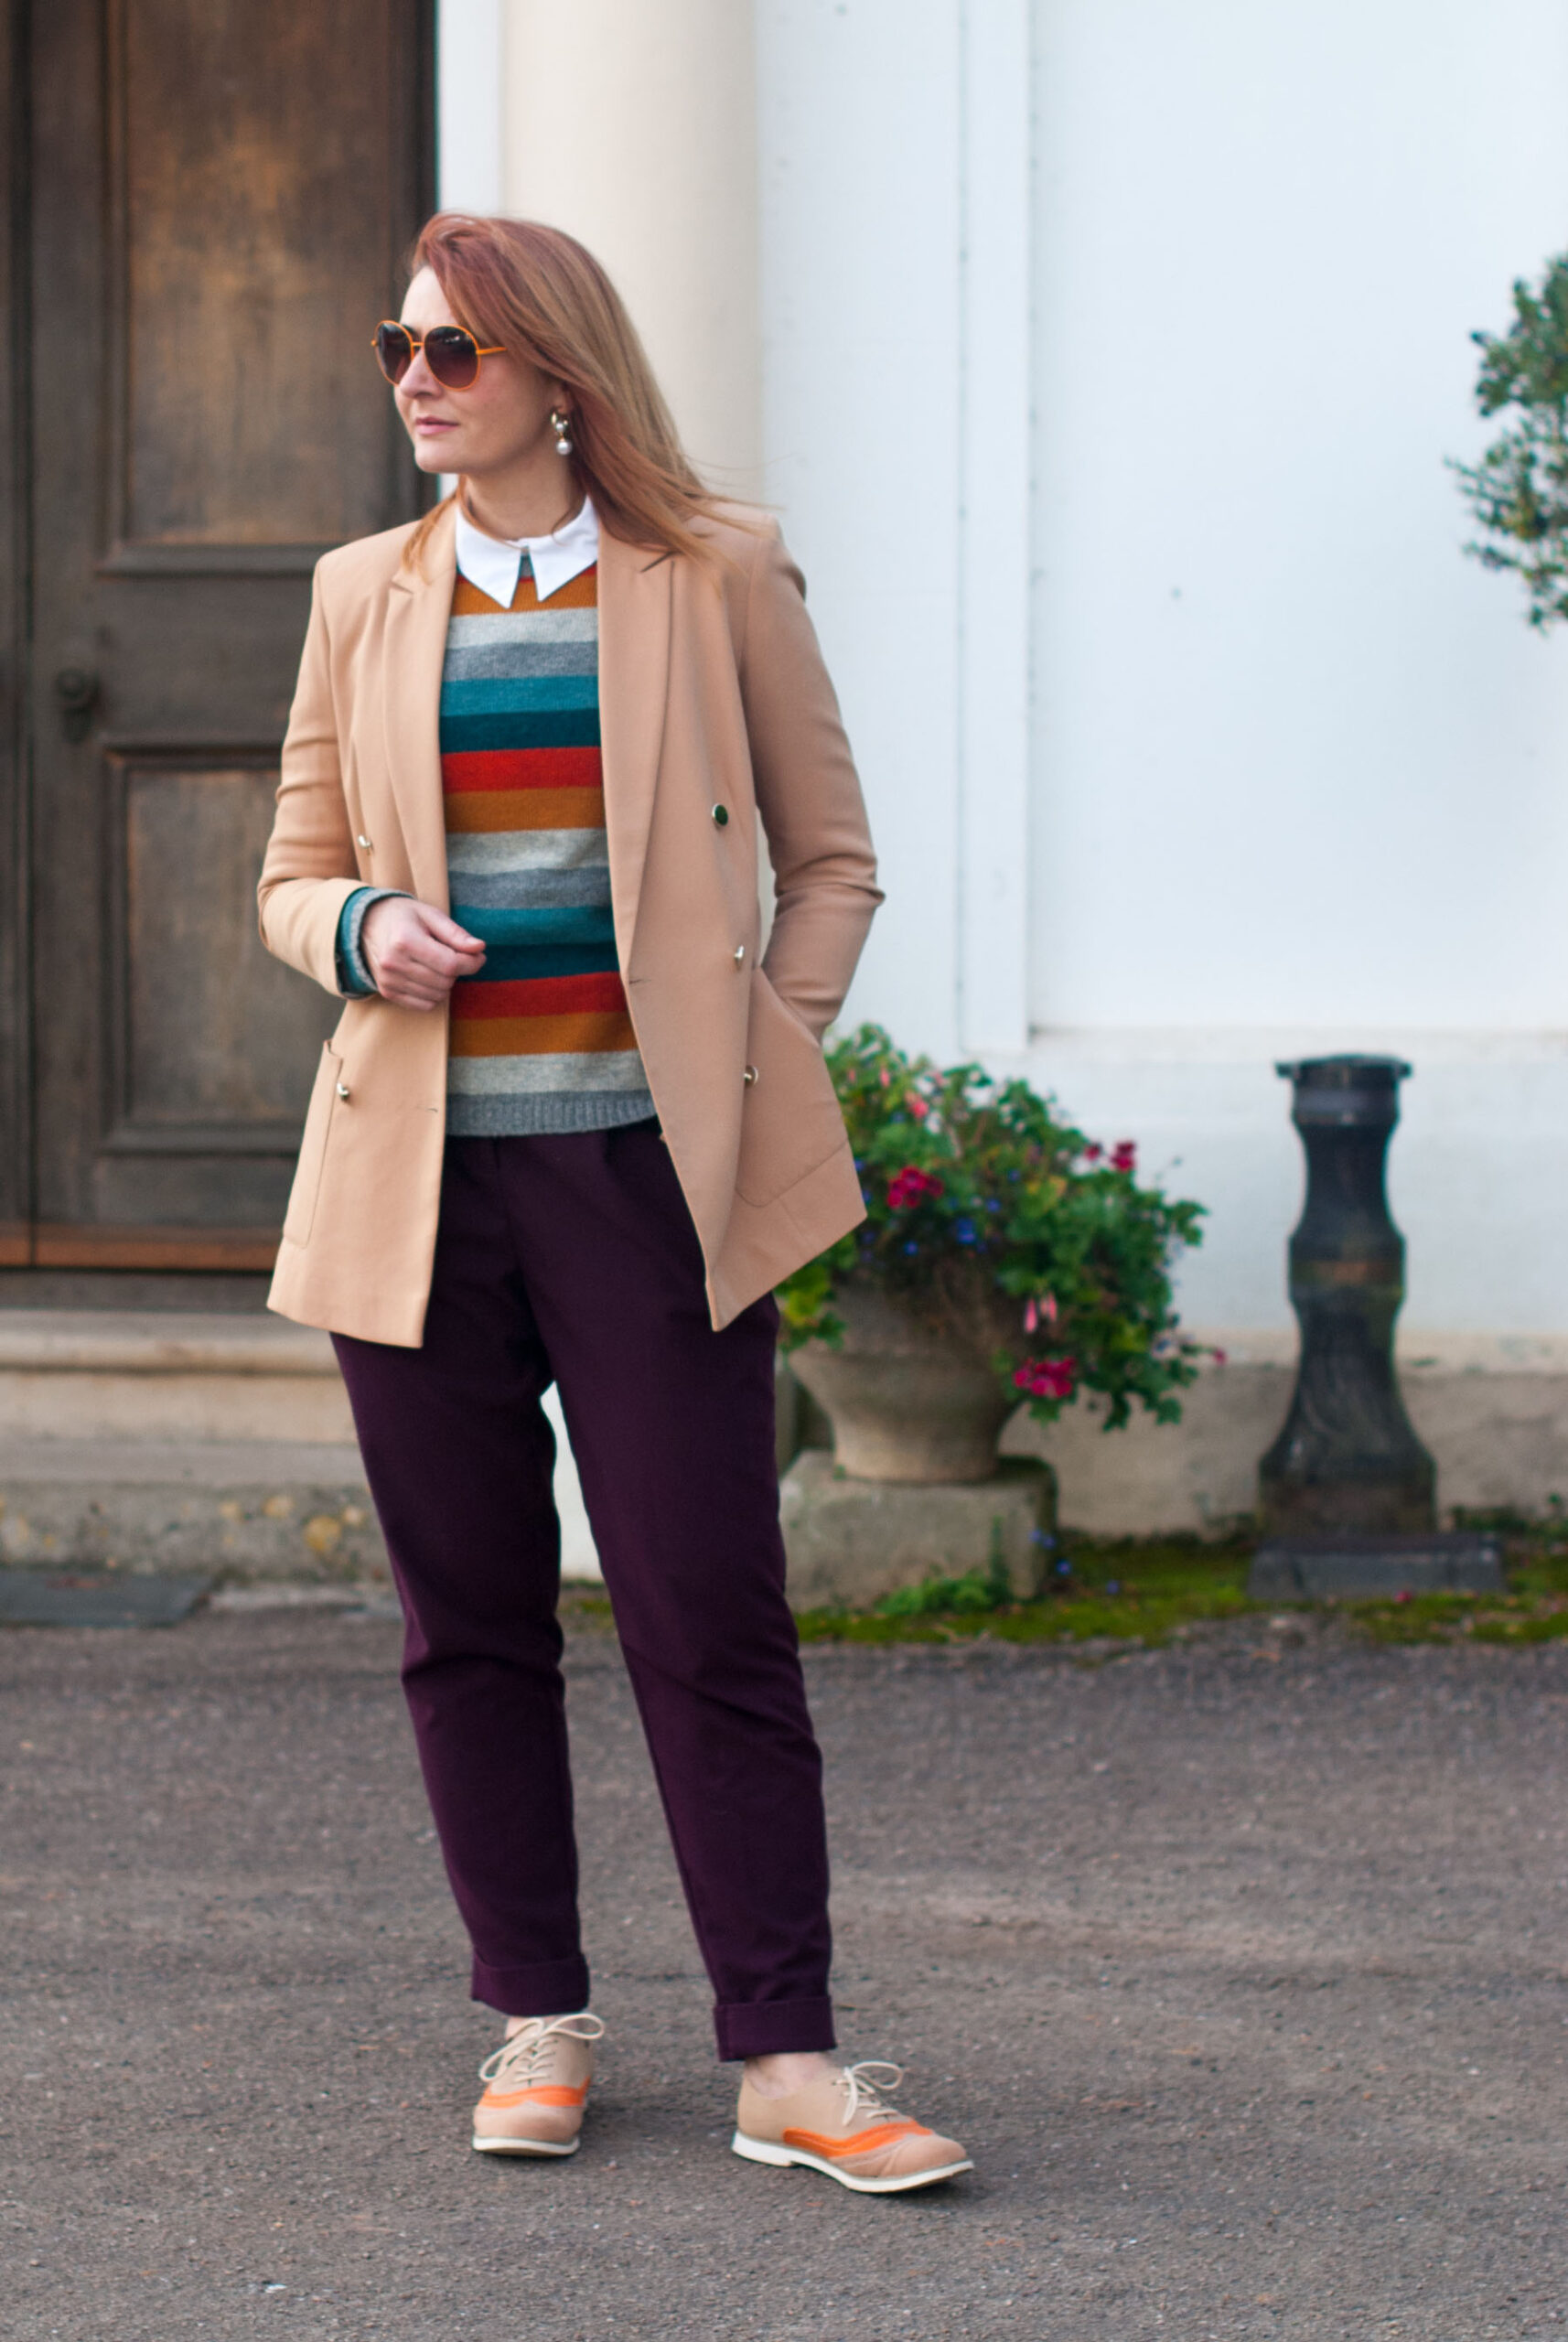 Blazers: Workwear Ideas, What to Wear to the Office Post-Pandemic | Not Dressed As Lamb, Over 40 Style and Fashion